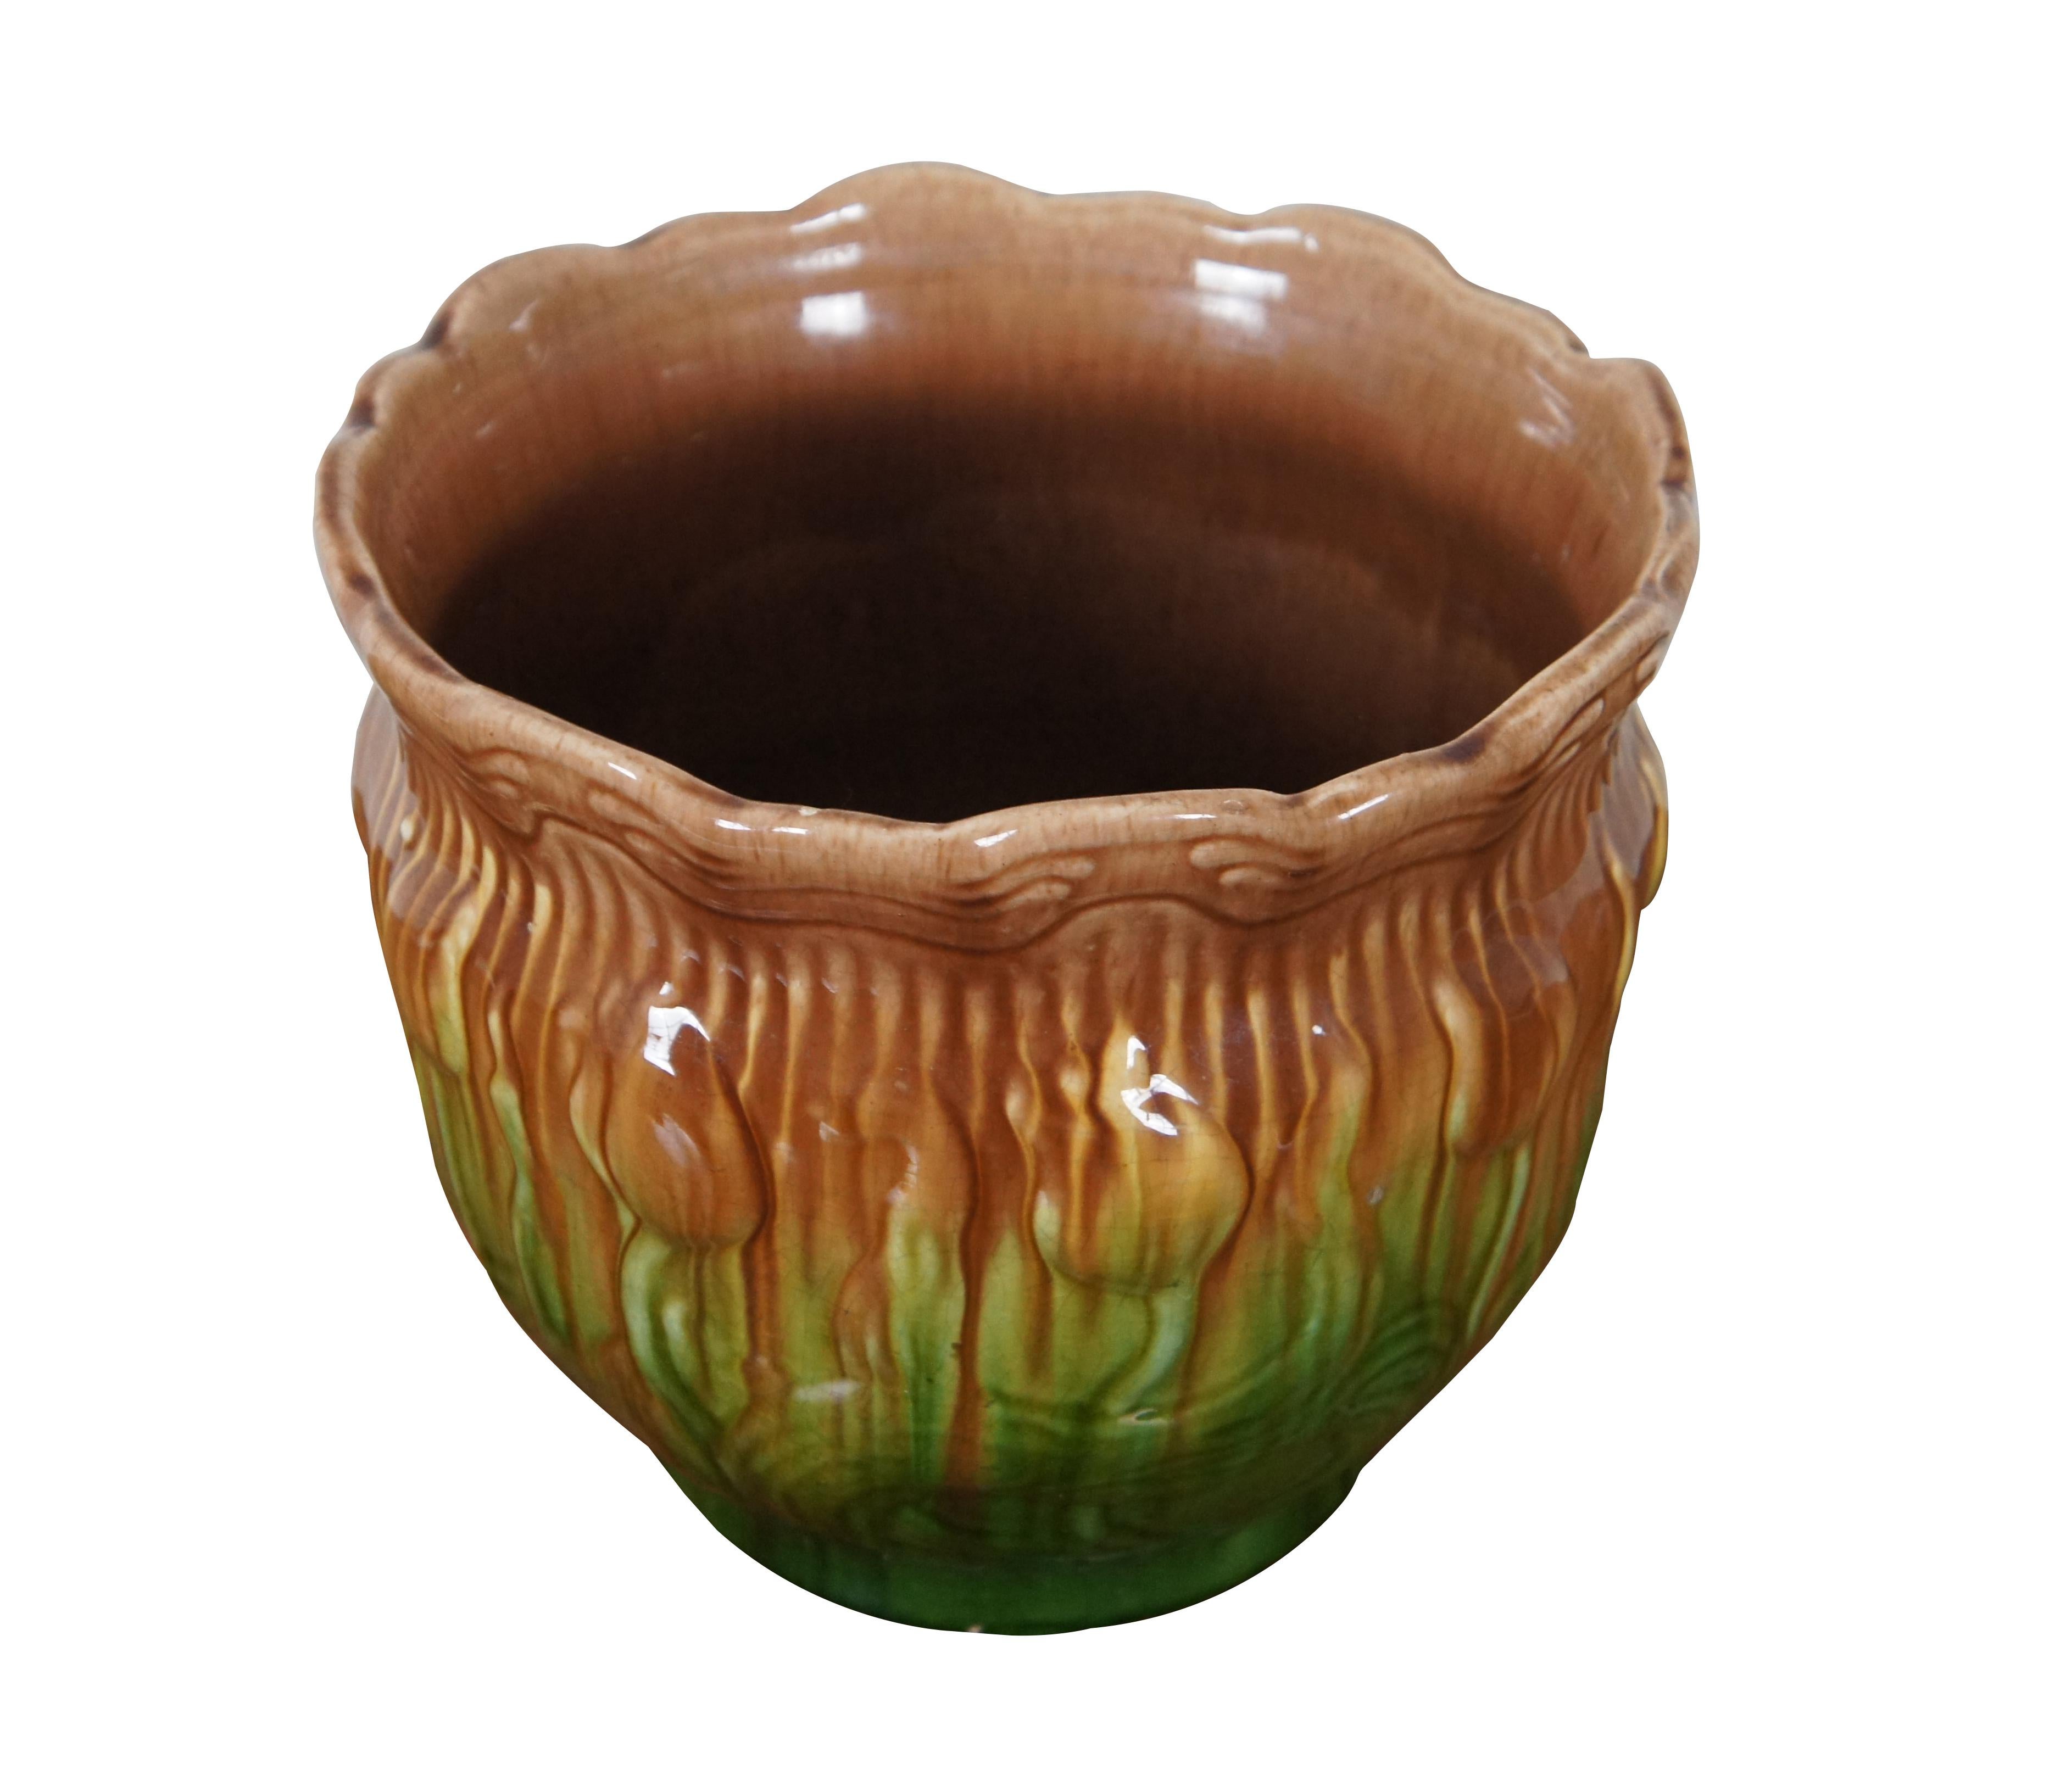 Antique majolica pottery planter / jardiniere with a round form, footed base and flared, scalloped edge. Decorated with tulips in green and brown under a high gloss finish.

Dimensions:
10.5” x 8.75” (Diameter x Height)